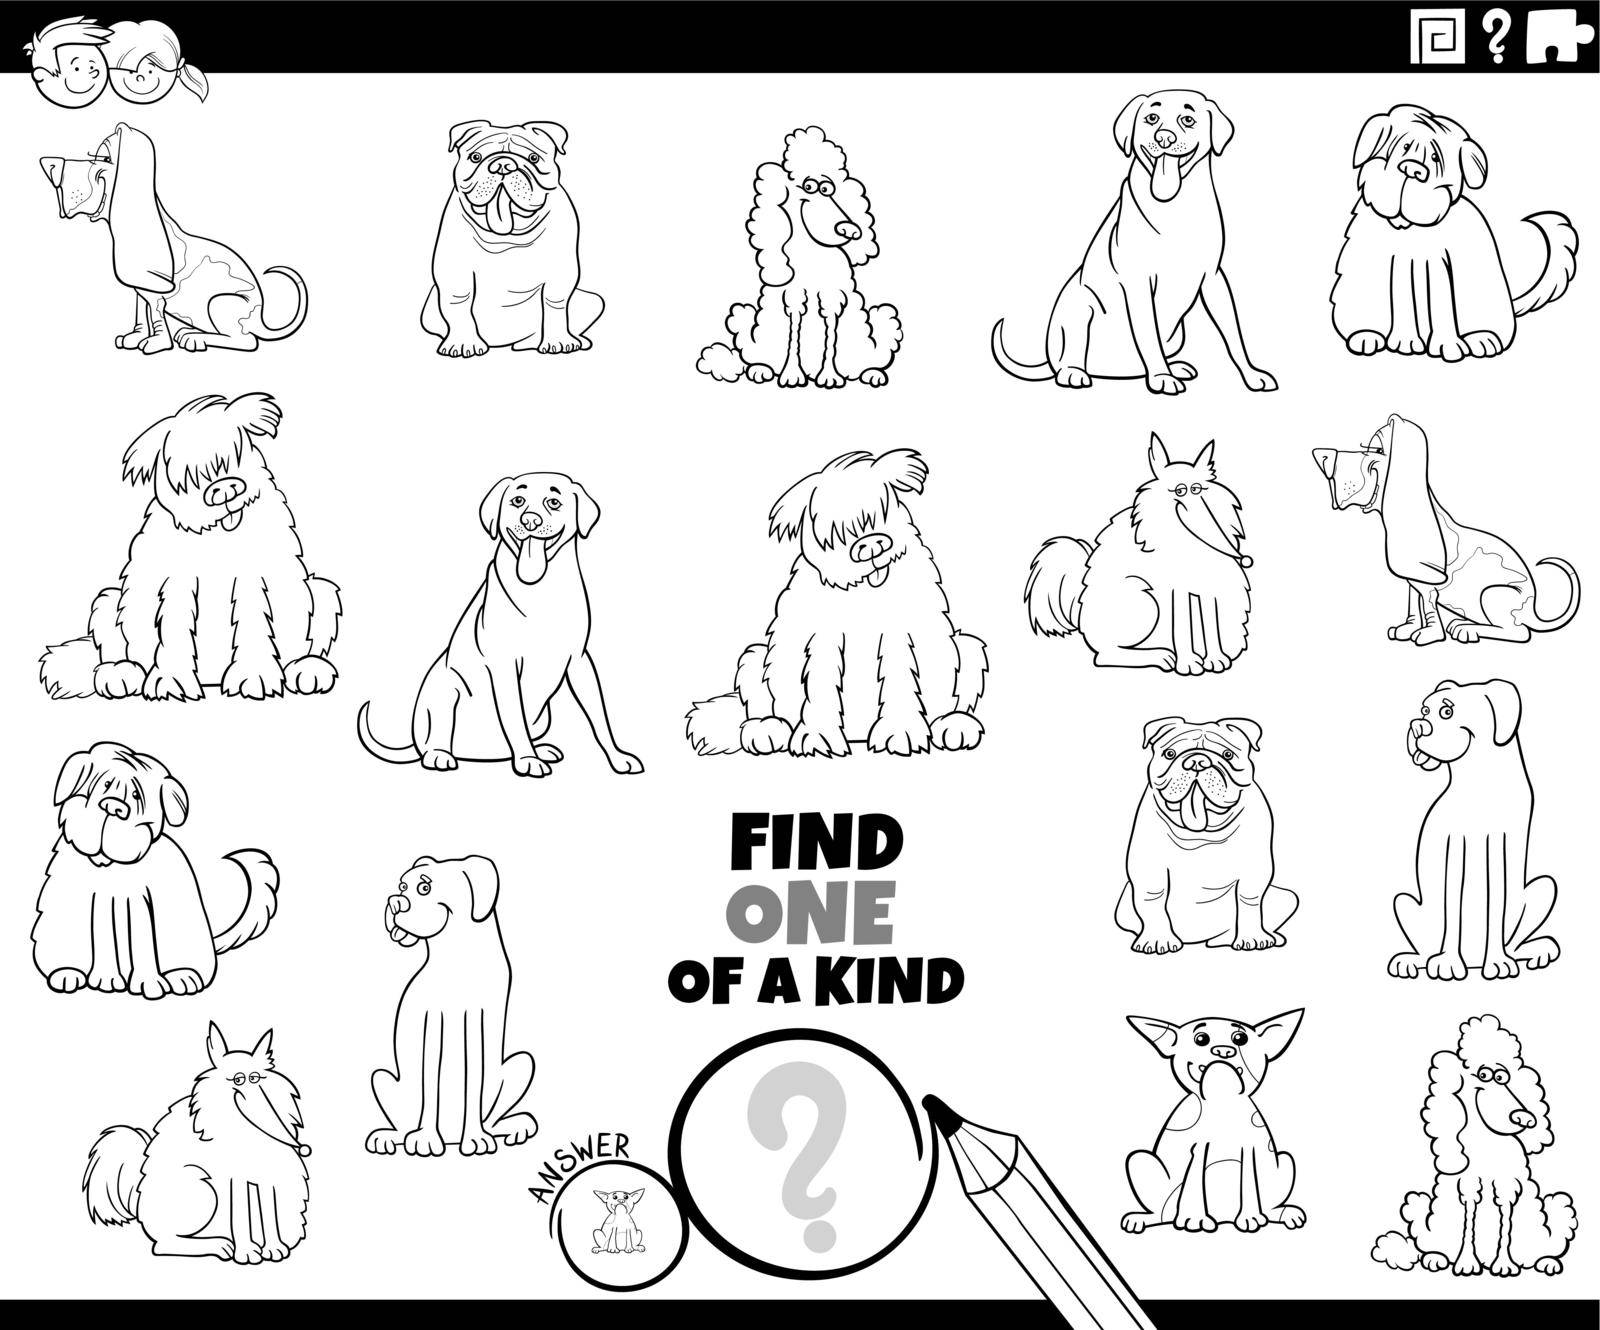 one of a kind game with pedigree dogs coloring book page by izakowski